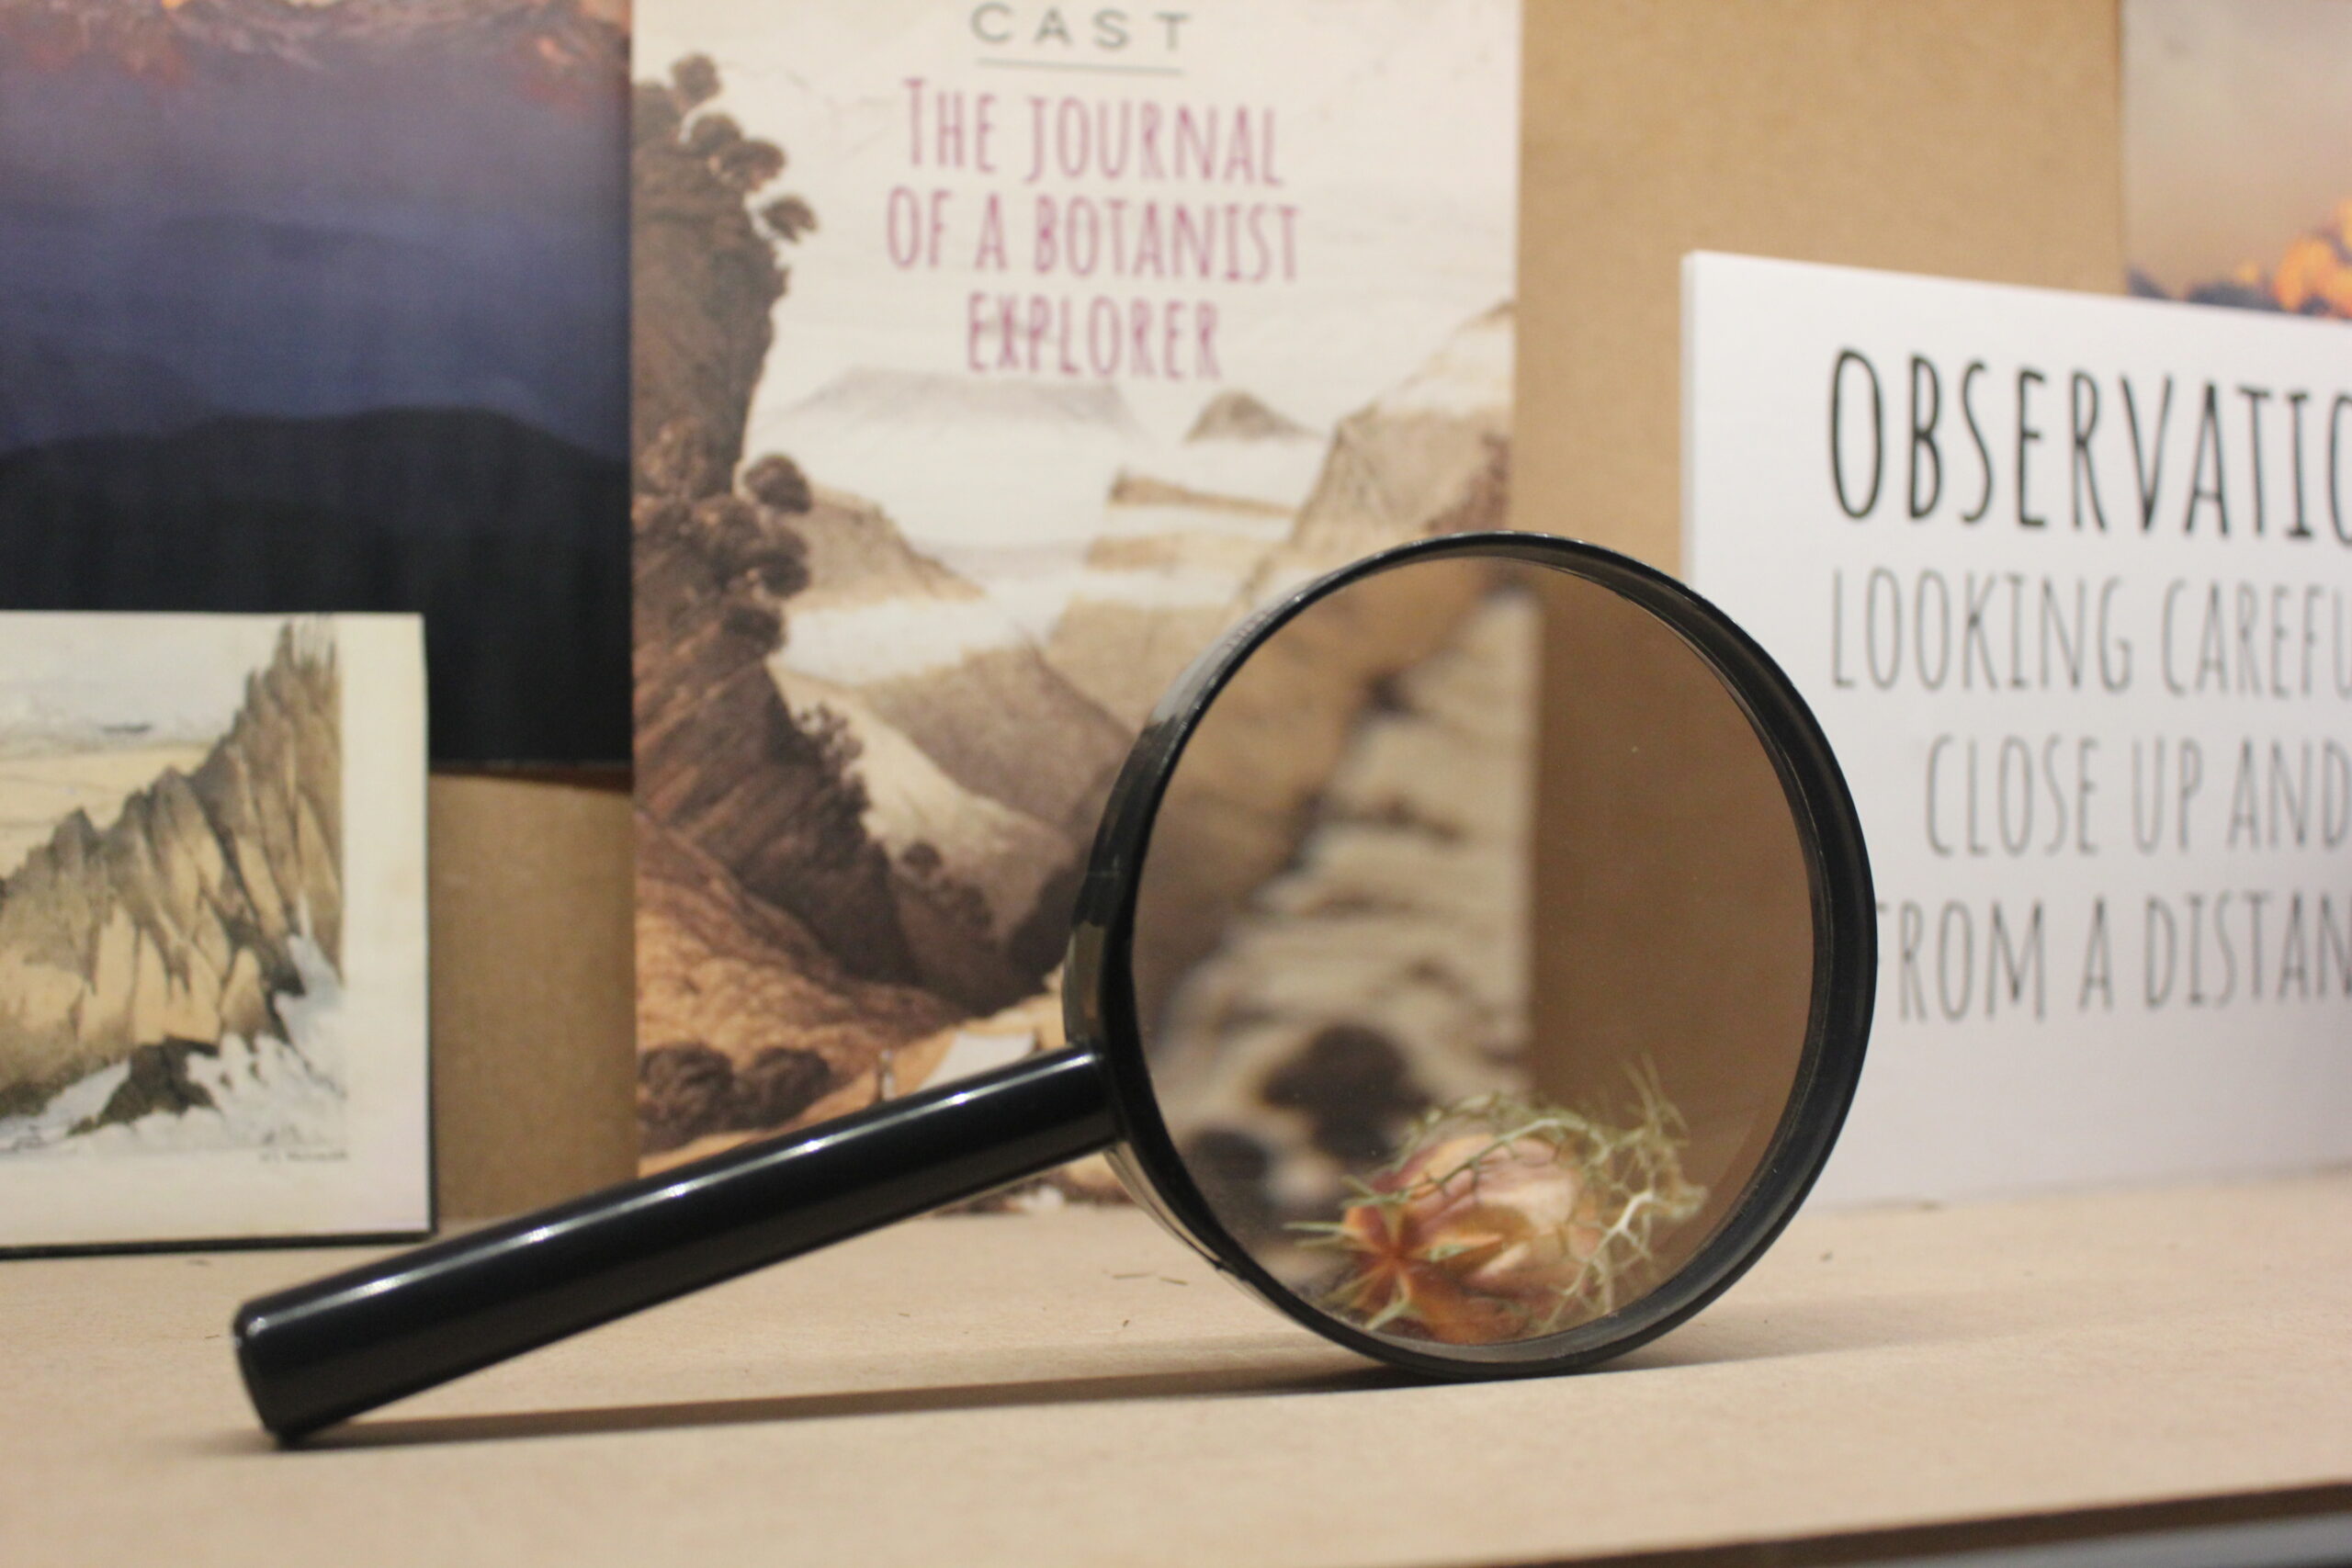 A magnifying glass sits propped up on its side in front of some posters